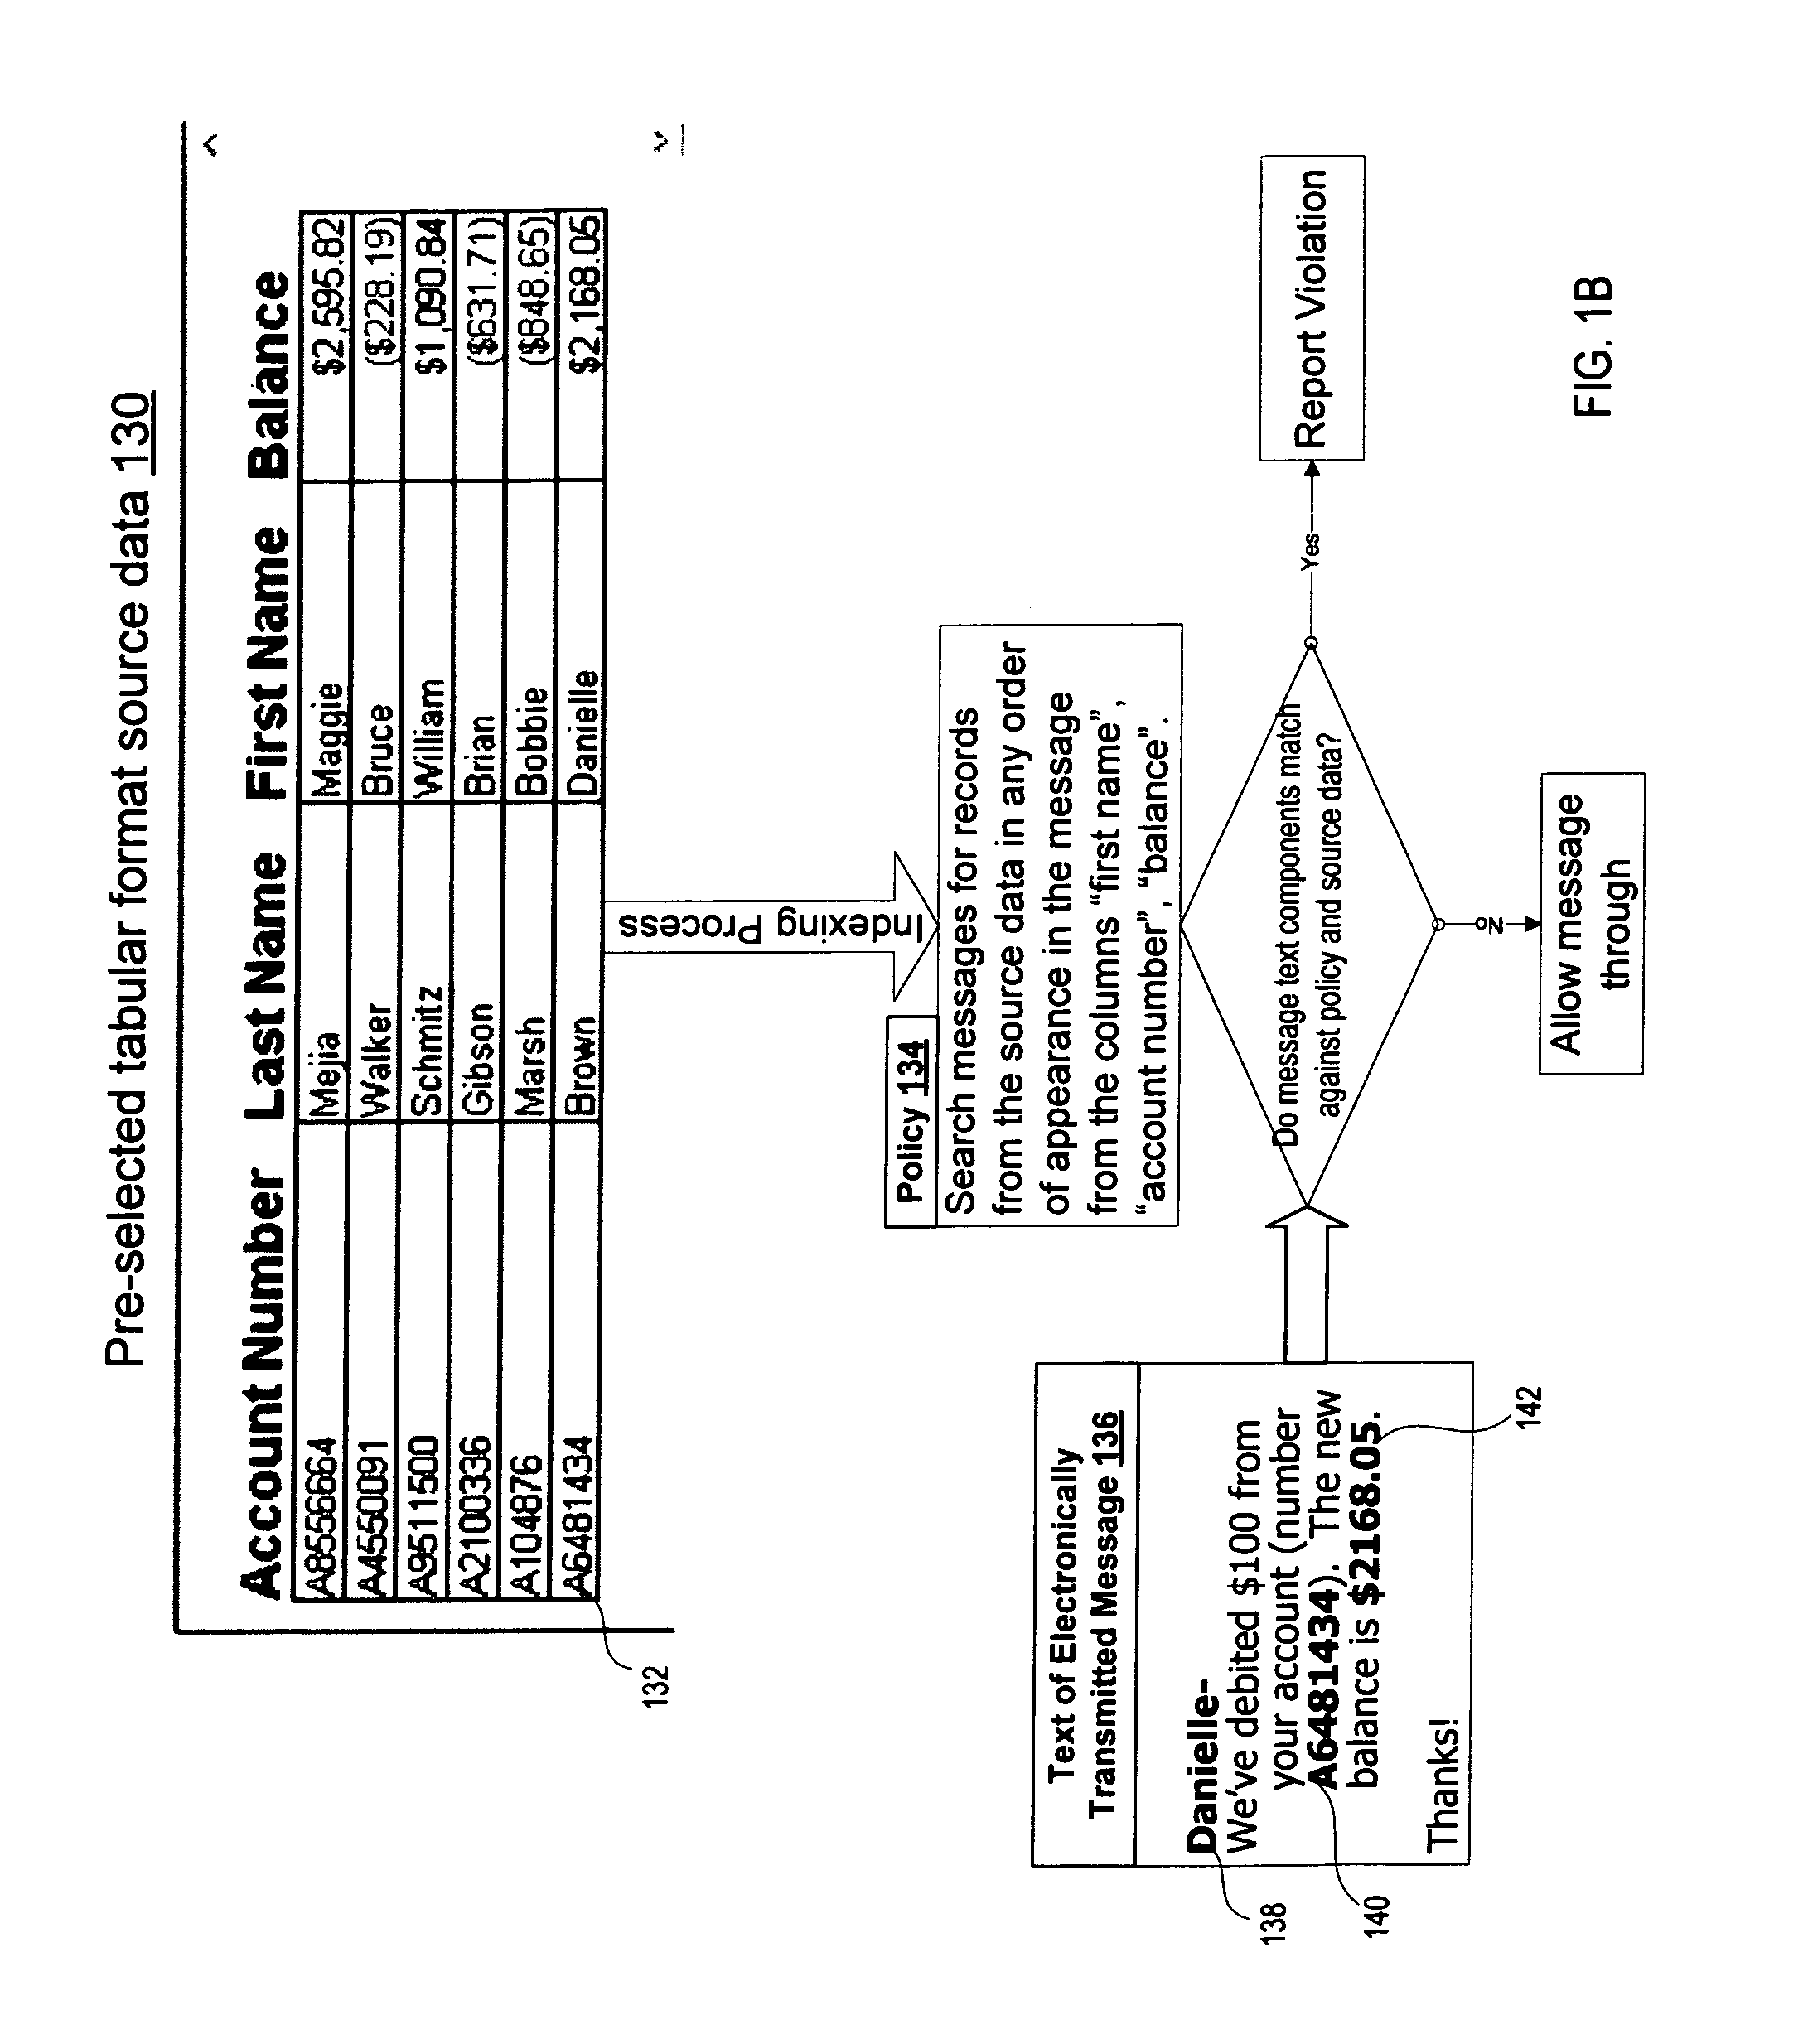 Detecting policy violations in information content containing data in a character-based language